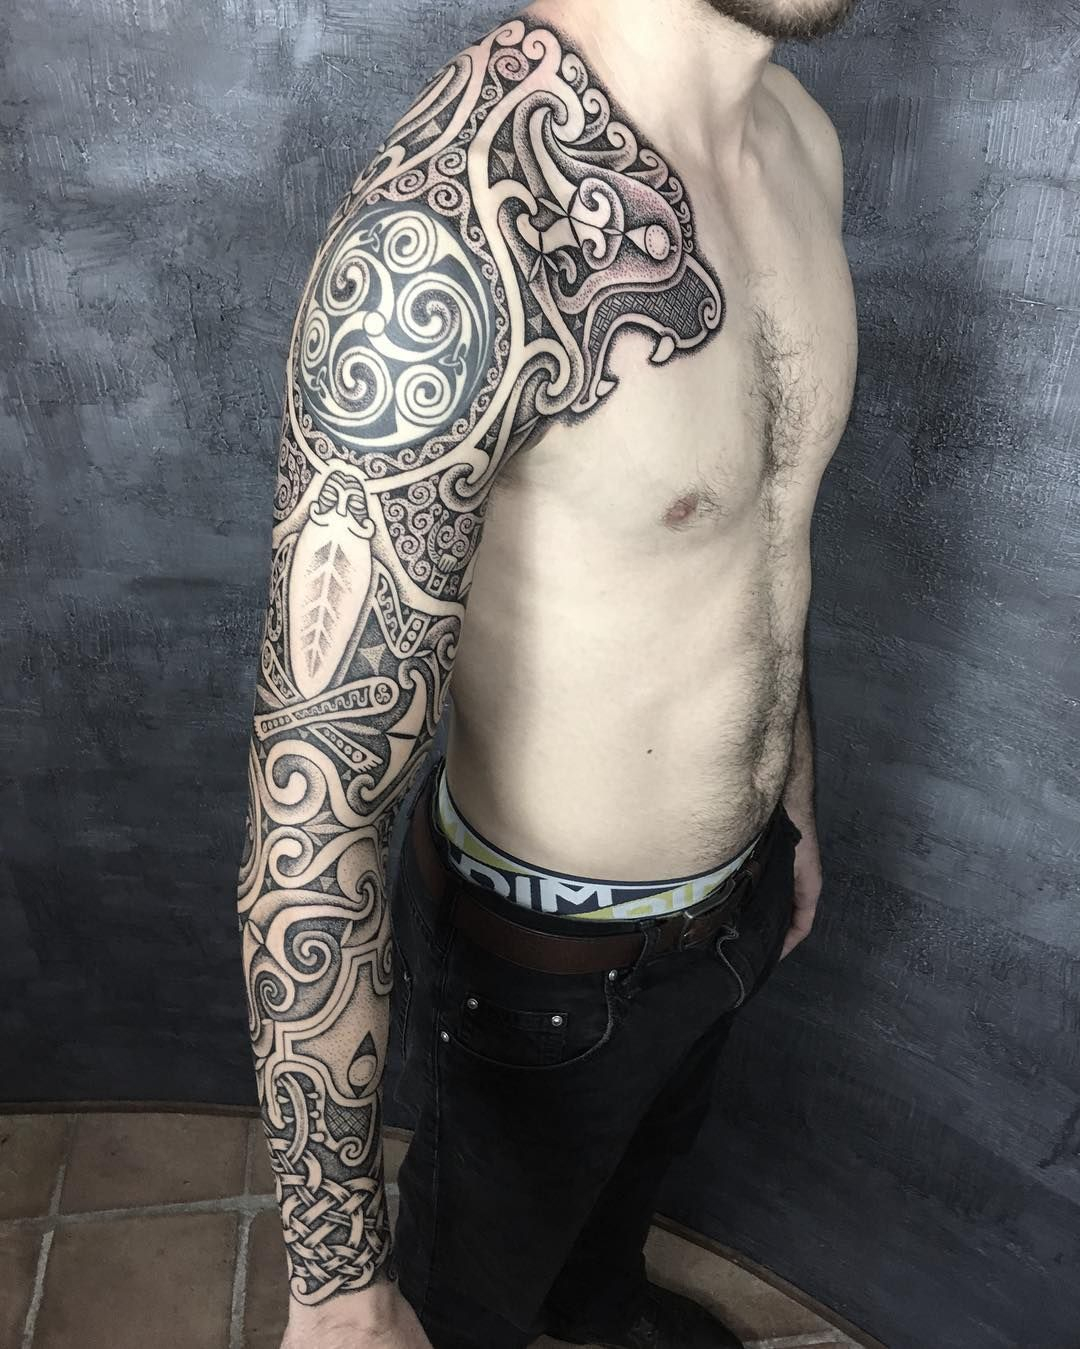 1261 Likes 21 Comments Sean Parry Sacredknottattoo On for measurements 1080 X 1349